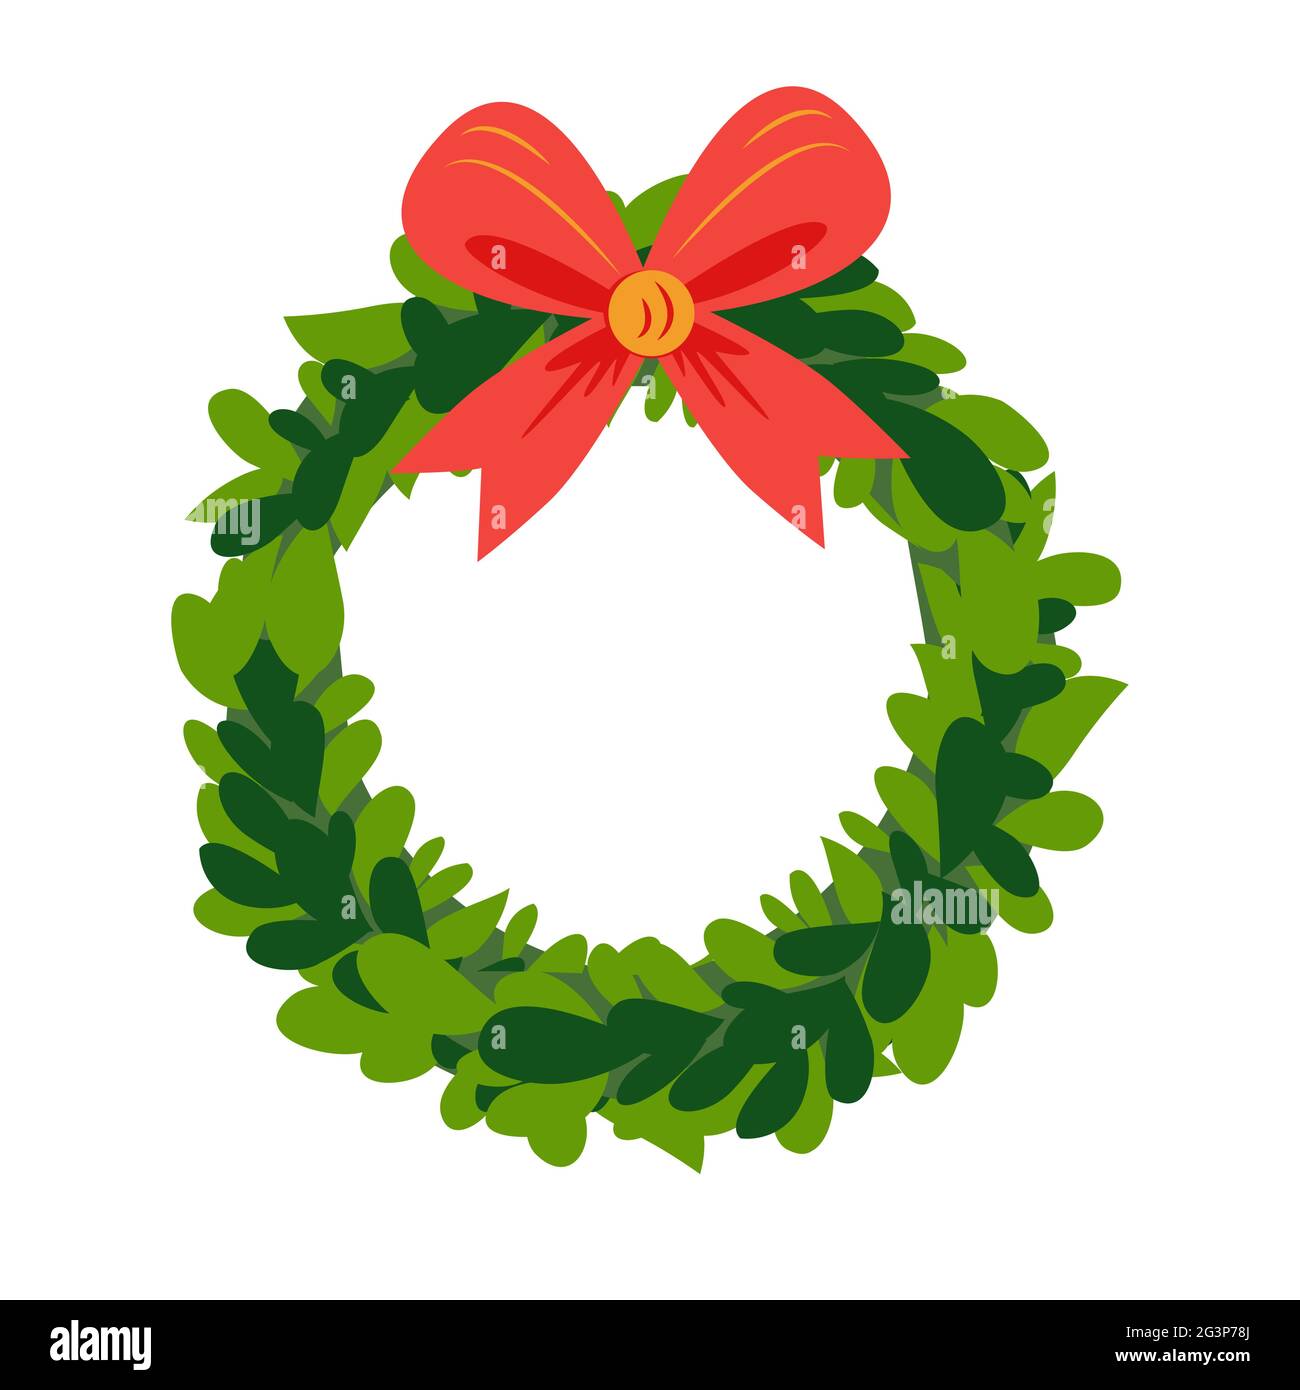 Christmas Wreath with ribbons, balls and bow. Christmas wreath of holly with red berries. New Year holiday celebration in December Stock Vector